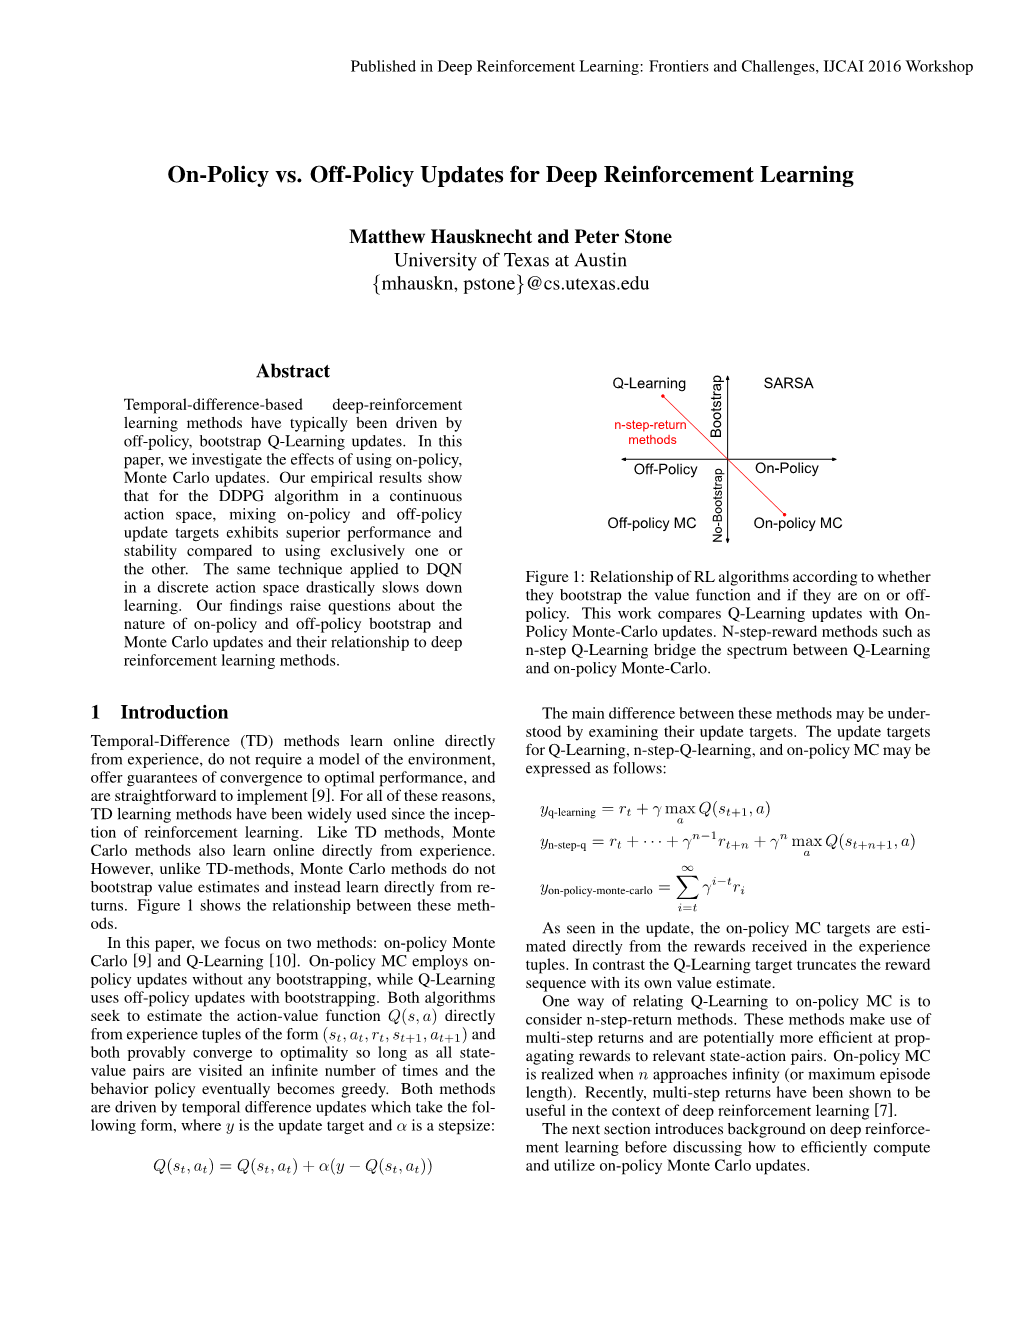 On-Policy Vs. Off-Policy Updates for Deep Reinforcement Learning